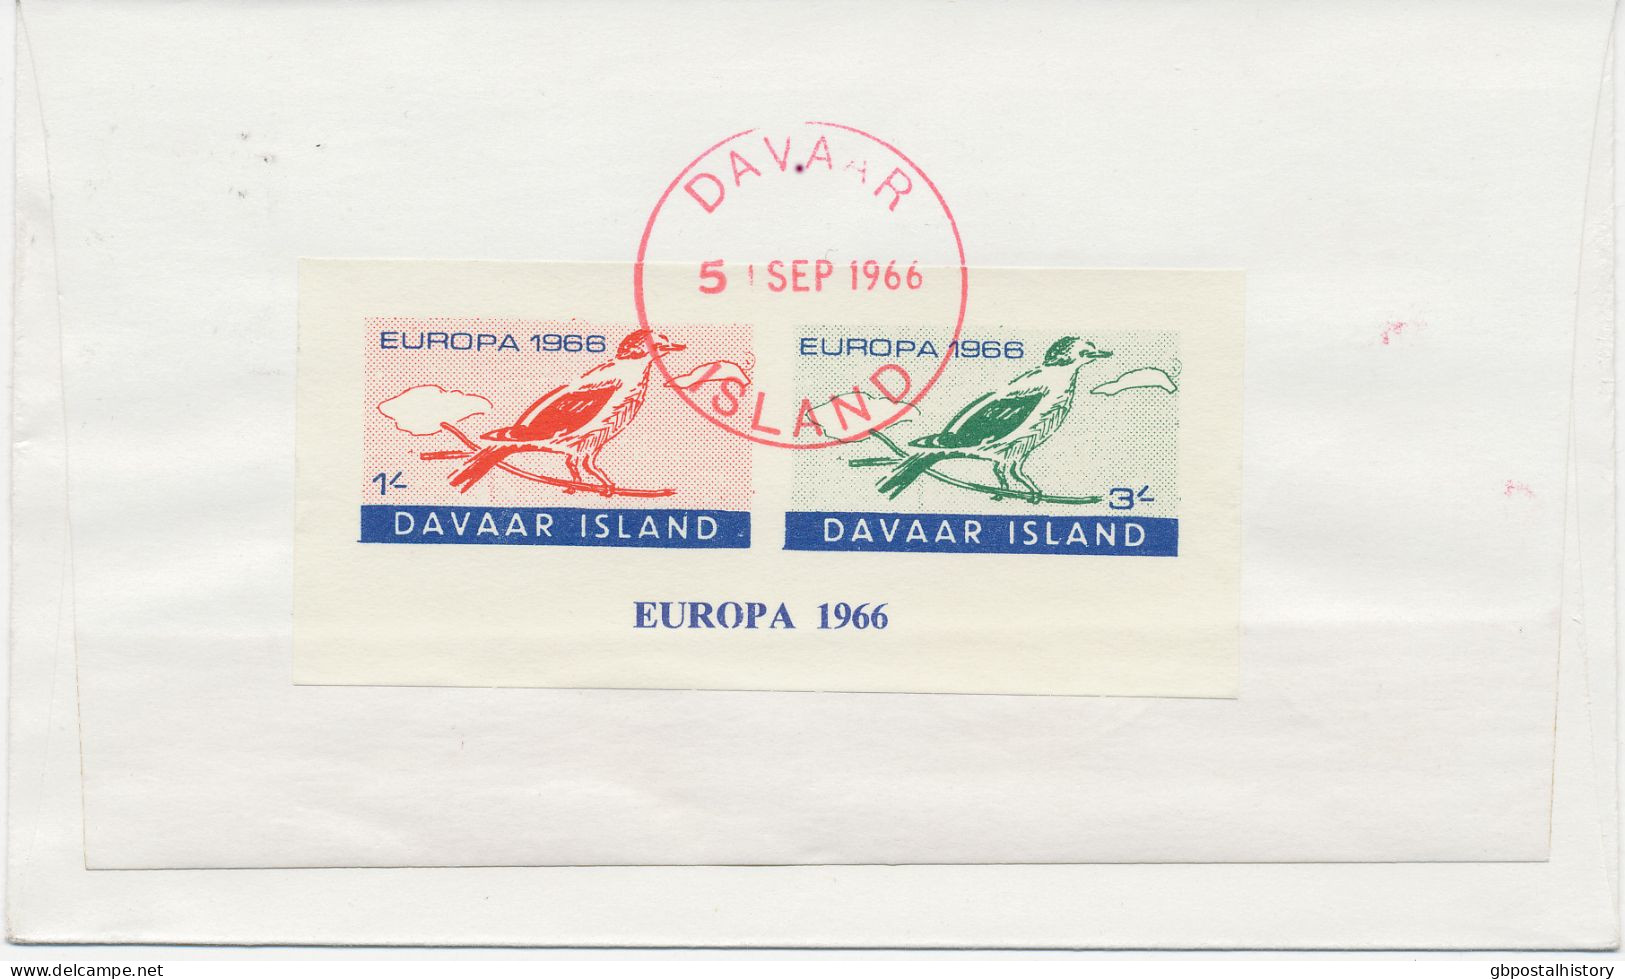 GB Davaar Island COLLECTION 1964/6 7 different FDC's all rare EUROPE-CEPT issues extremely rare as well as two DIANA FDC